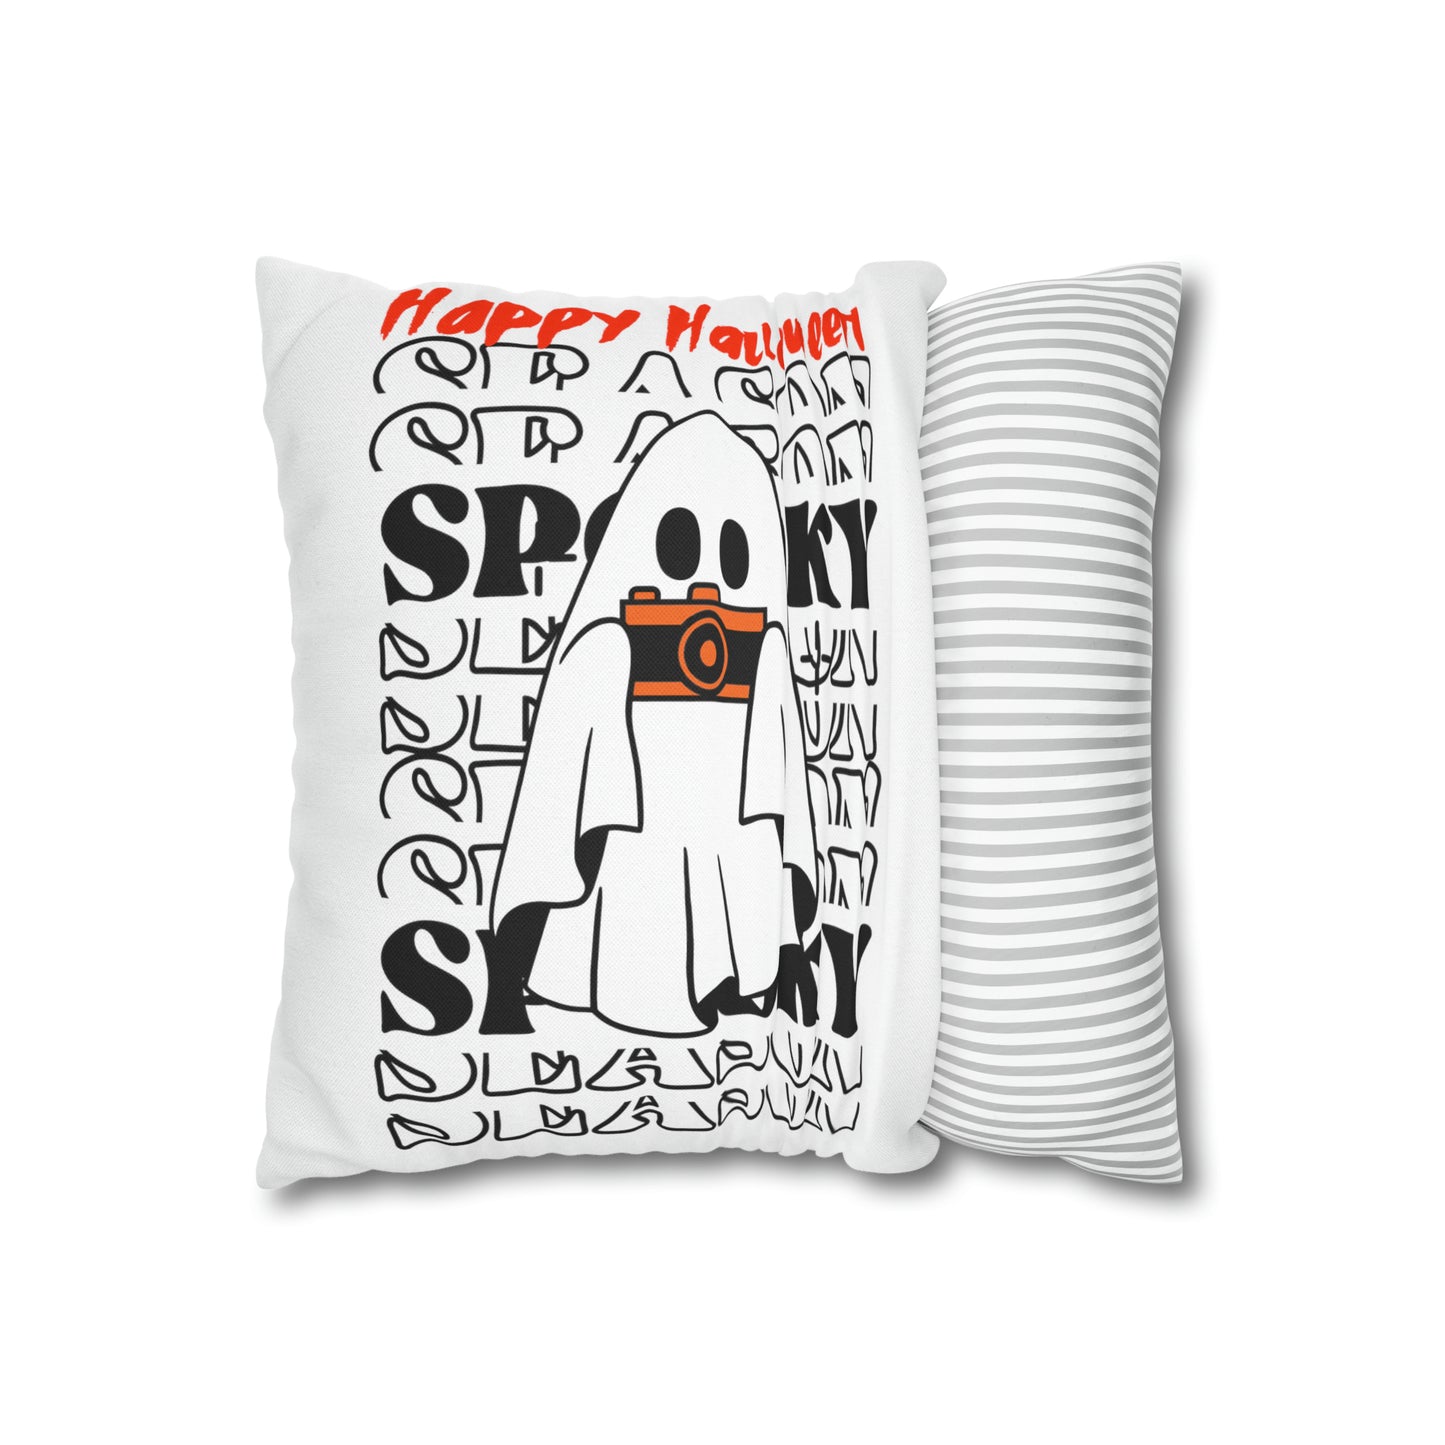 Spun Polyester Square Pillow Case  - Halloween - Little Ghost - 06/08